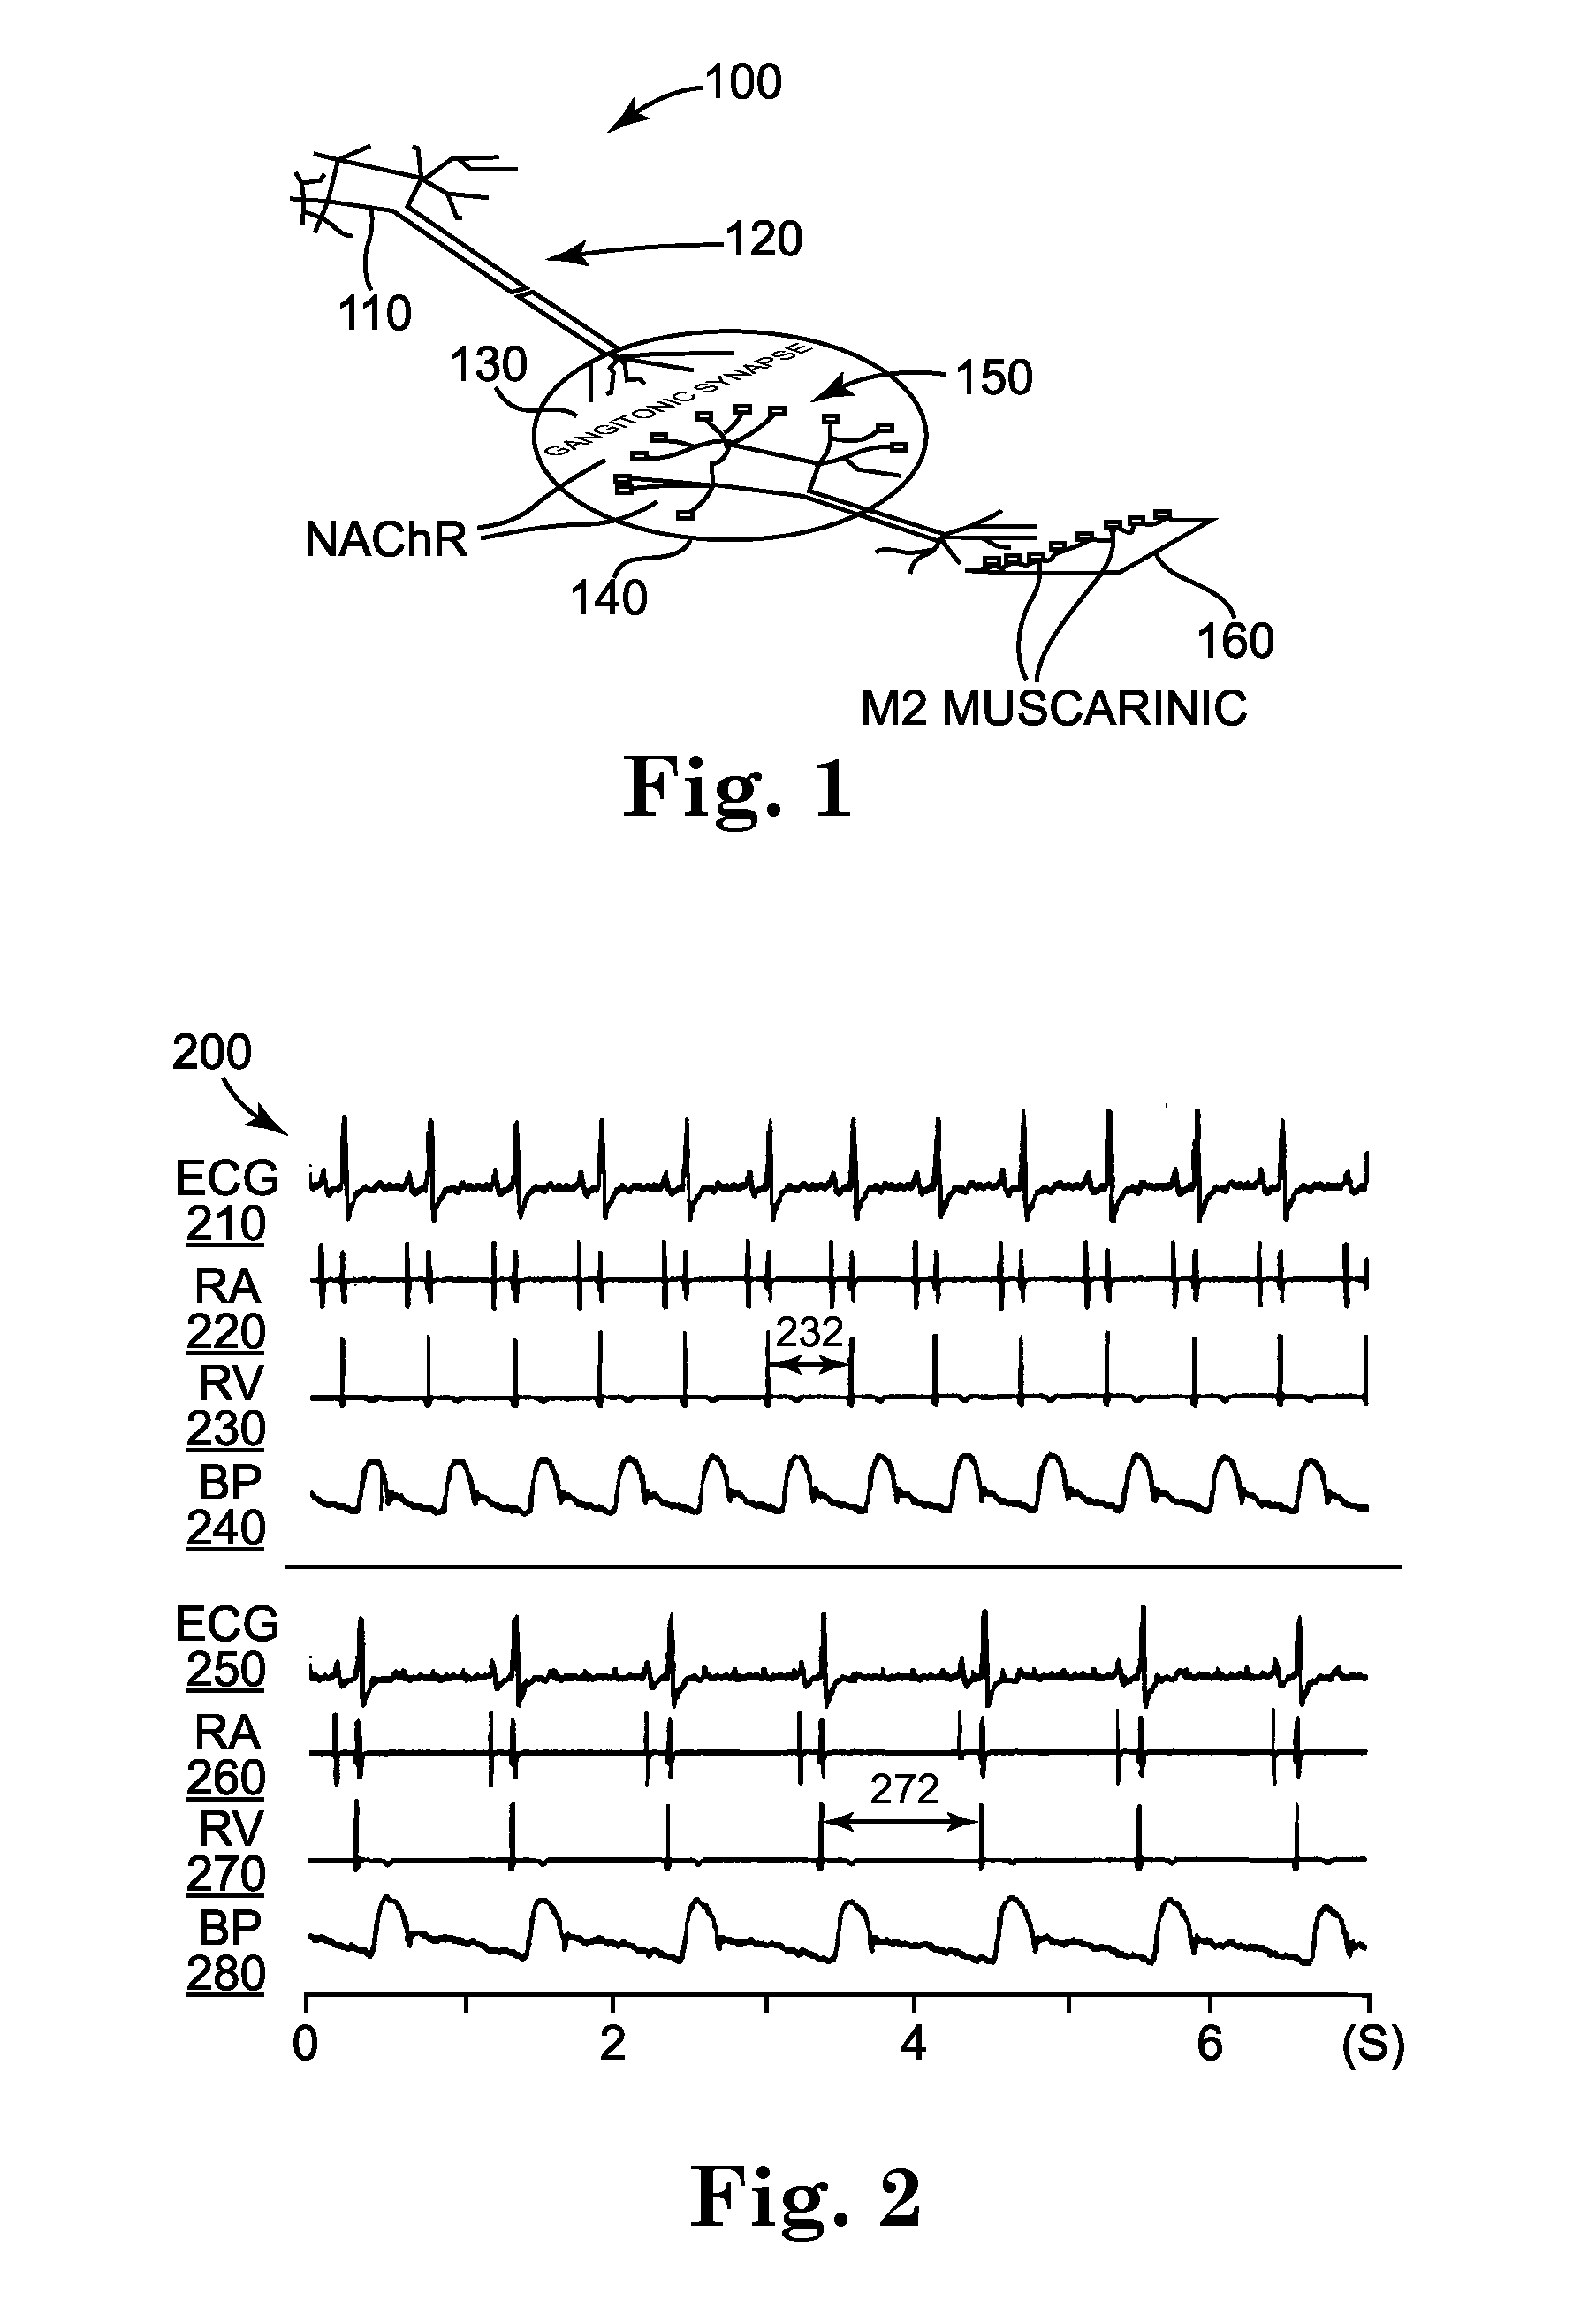 Treatment of Cardiac Arrhythmia by Modification of Neuronal Signaling Through Fat Pads of the Heart